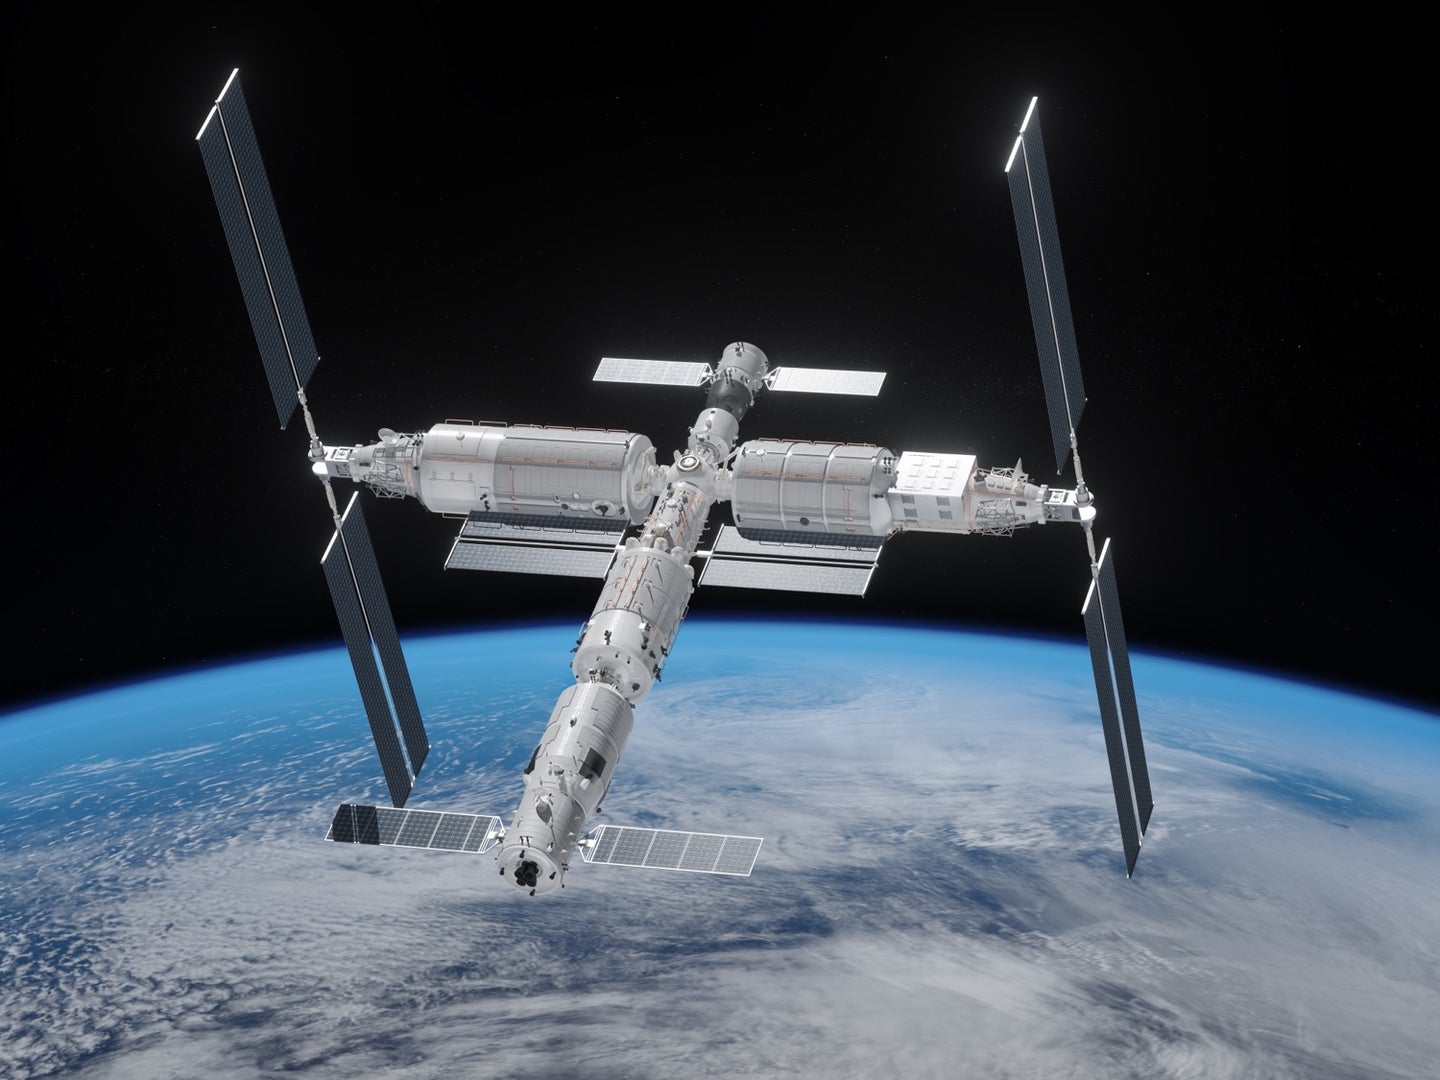 a t-shaped module space station in orbit above the earth